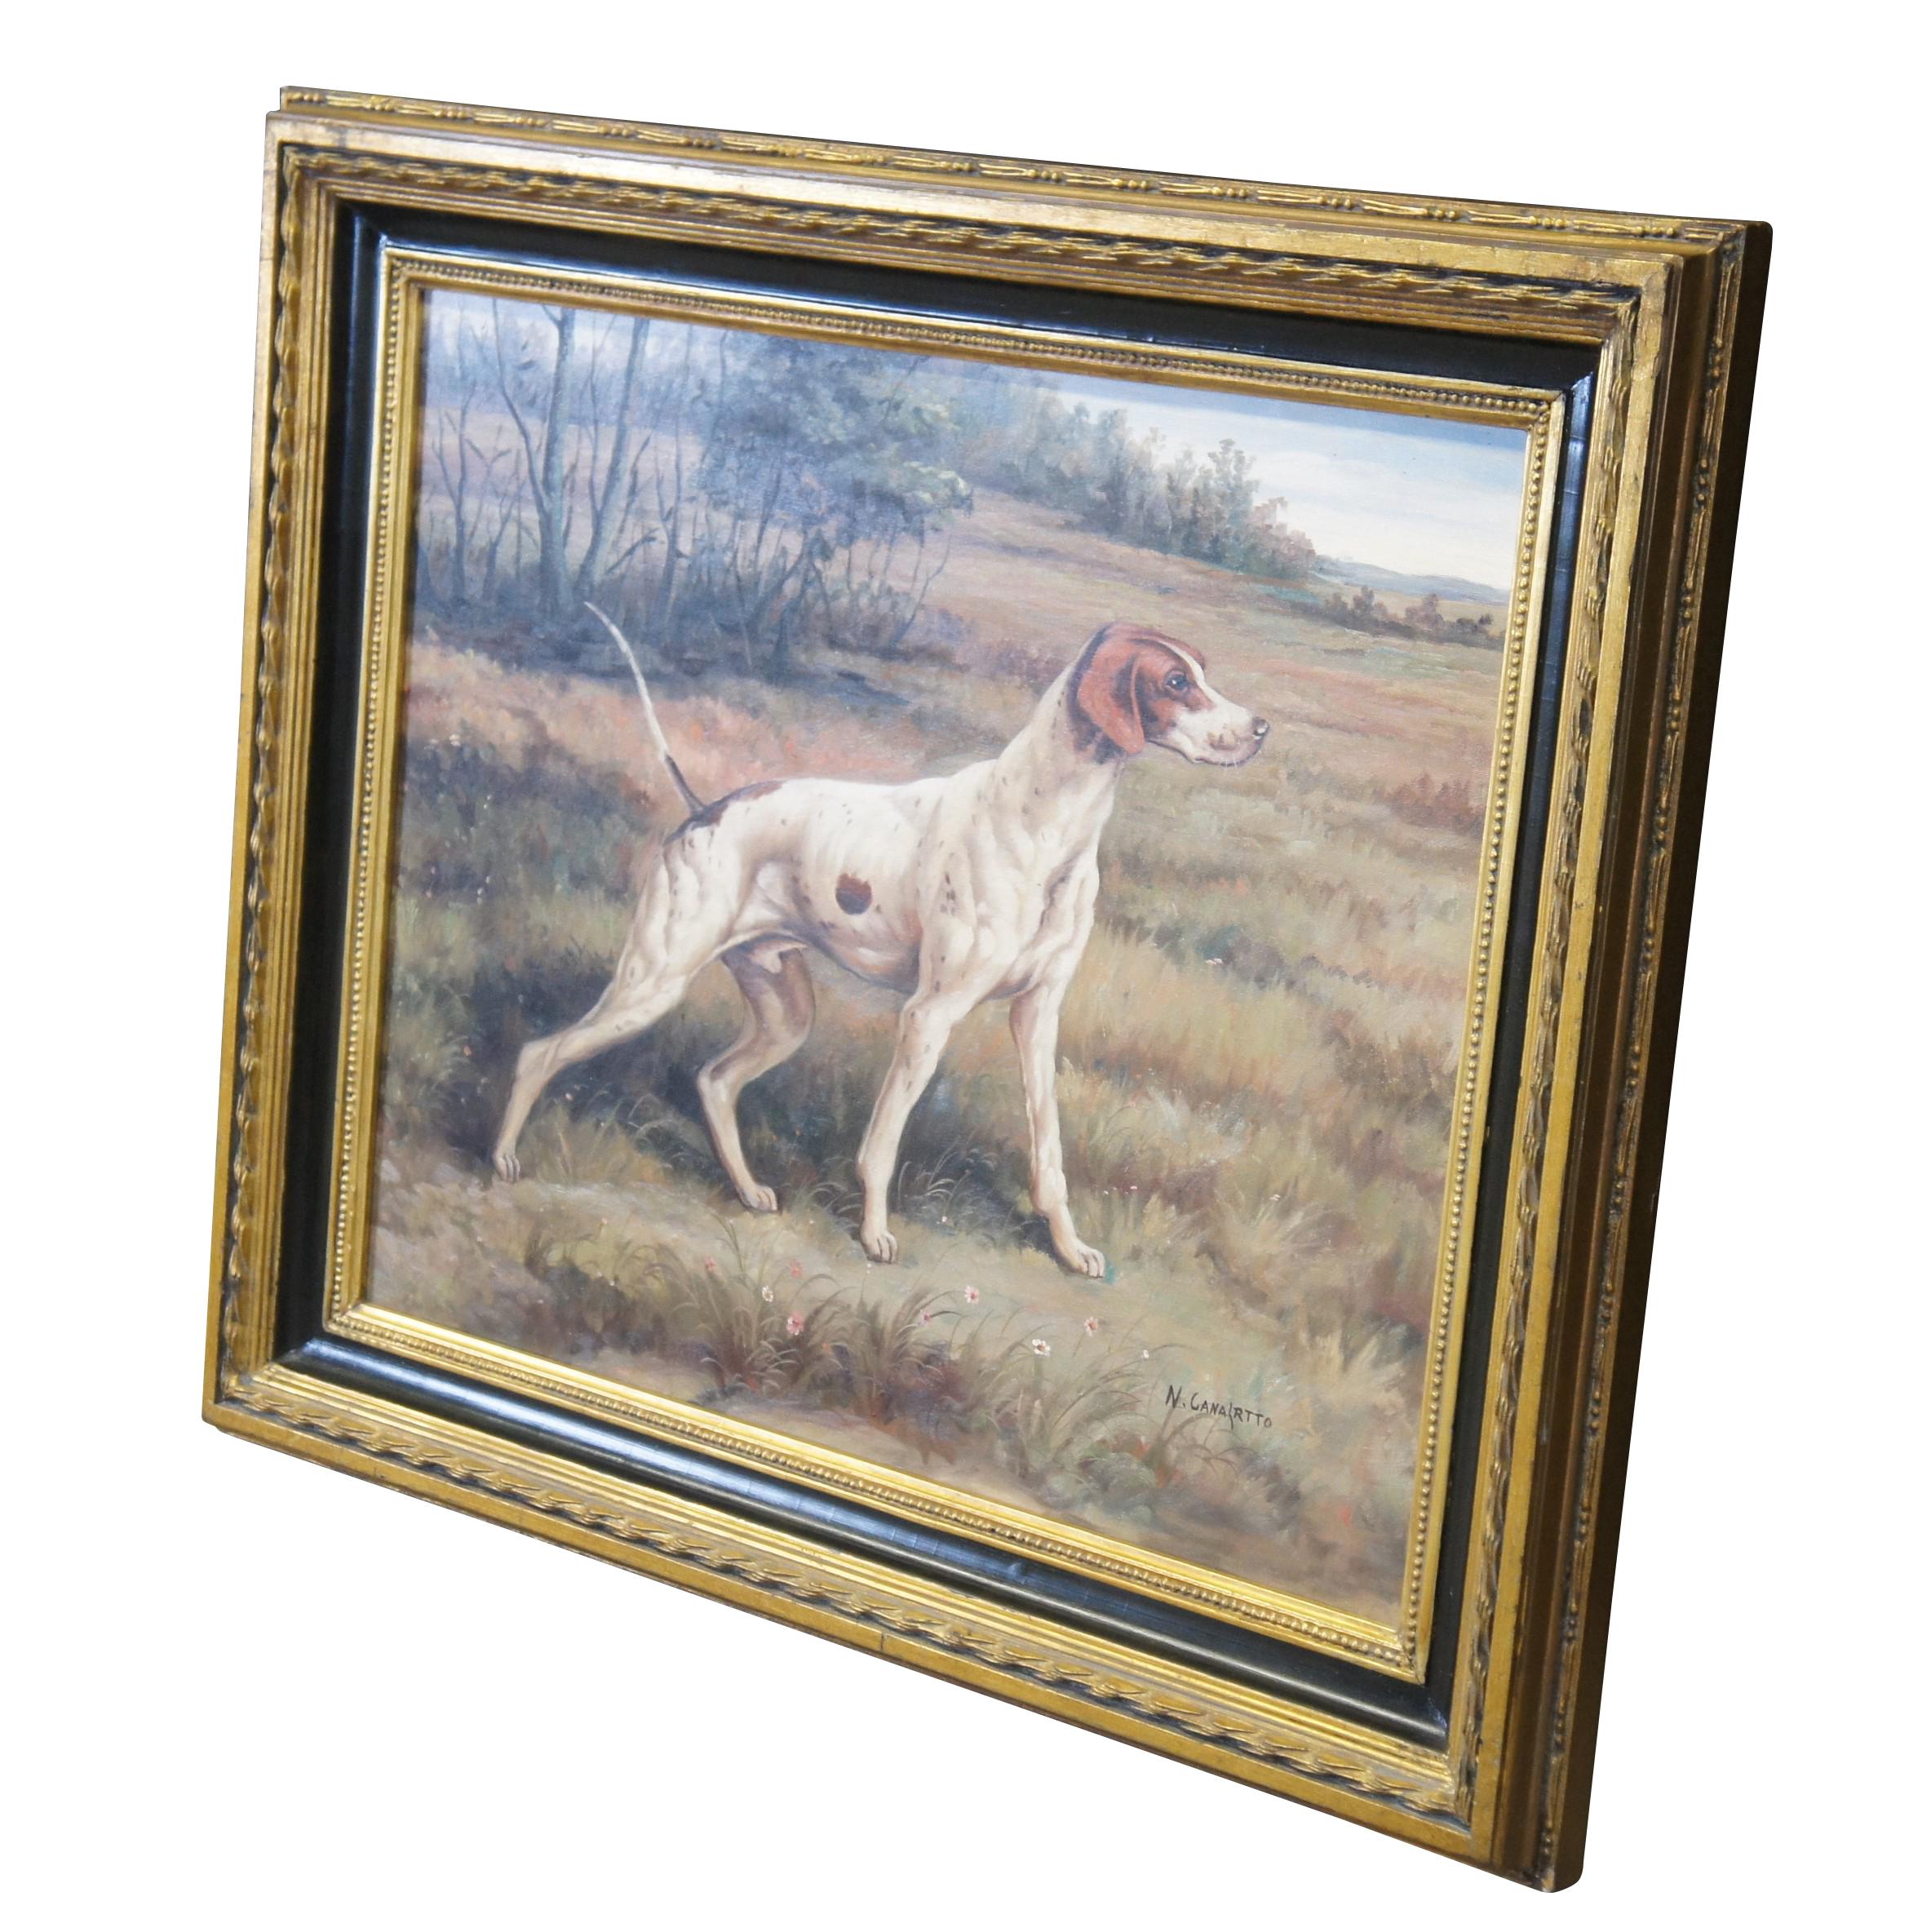 Vintage oil painting on canvas featuring a portrait of a pointing hunting dog / foxhound in the field / countryside.  Signed by artist lower right.  Framed in ebonized gold frame.

Dimensions:
26.5